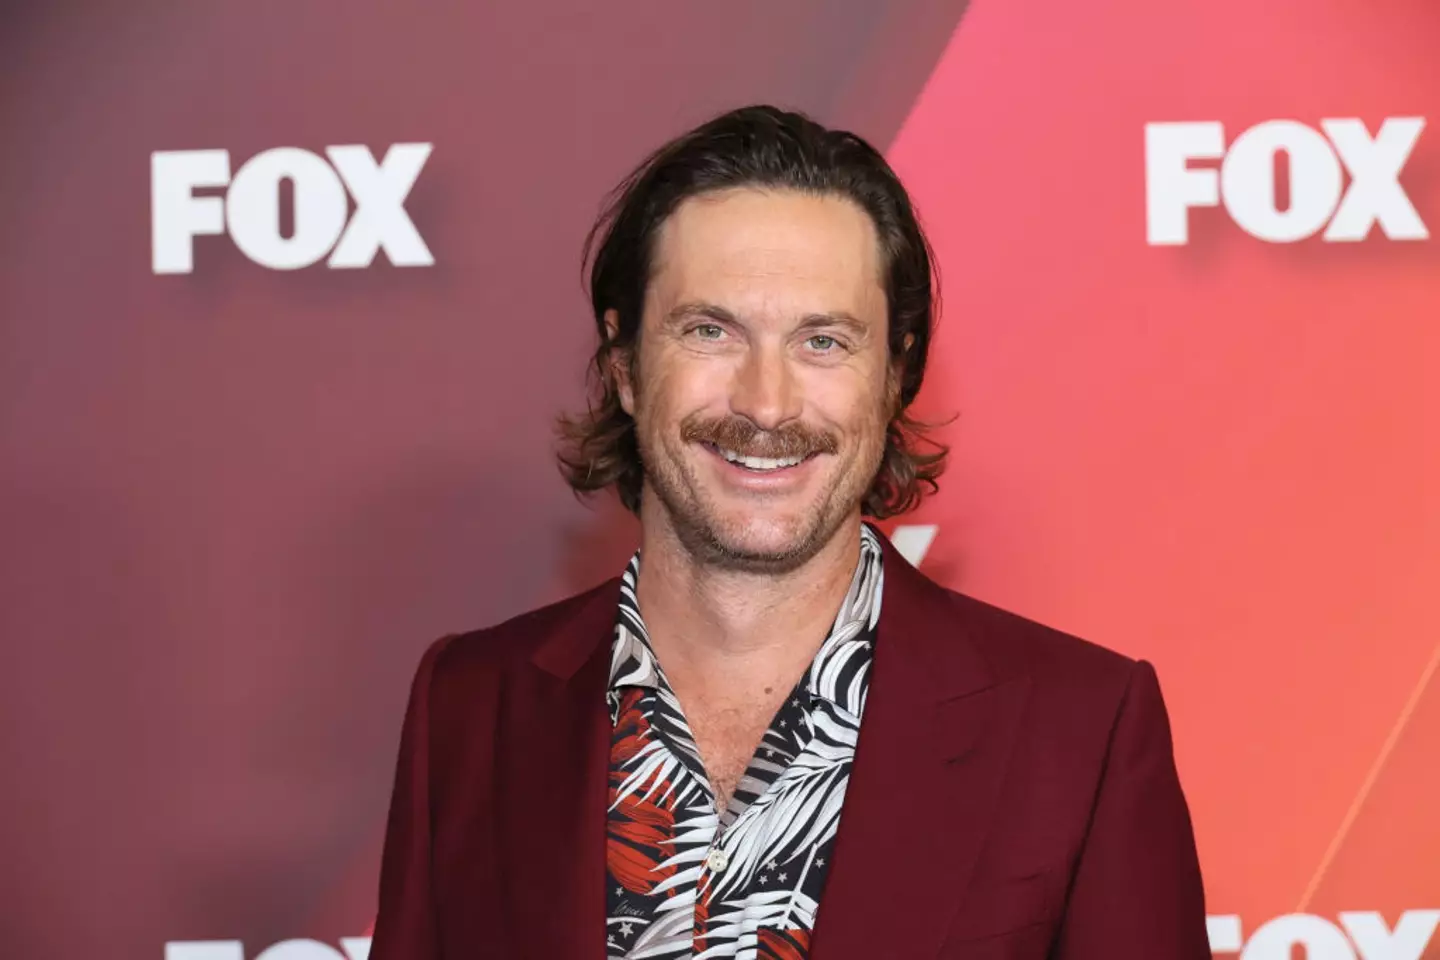 Oliver Hudson said he 'doesn't regret' the infidelity. (